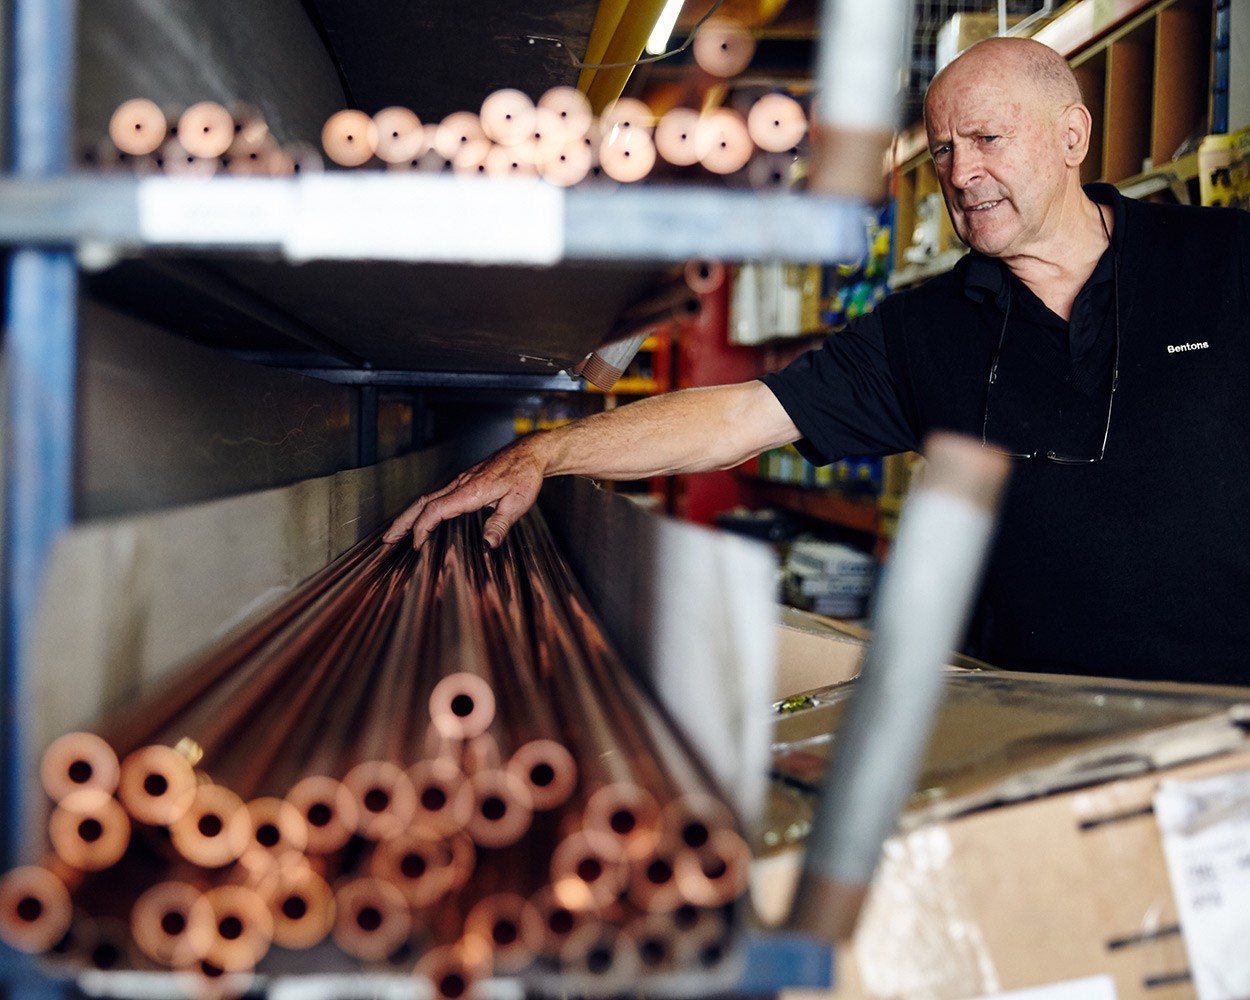 Man reaching for copper pipes off a shelf